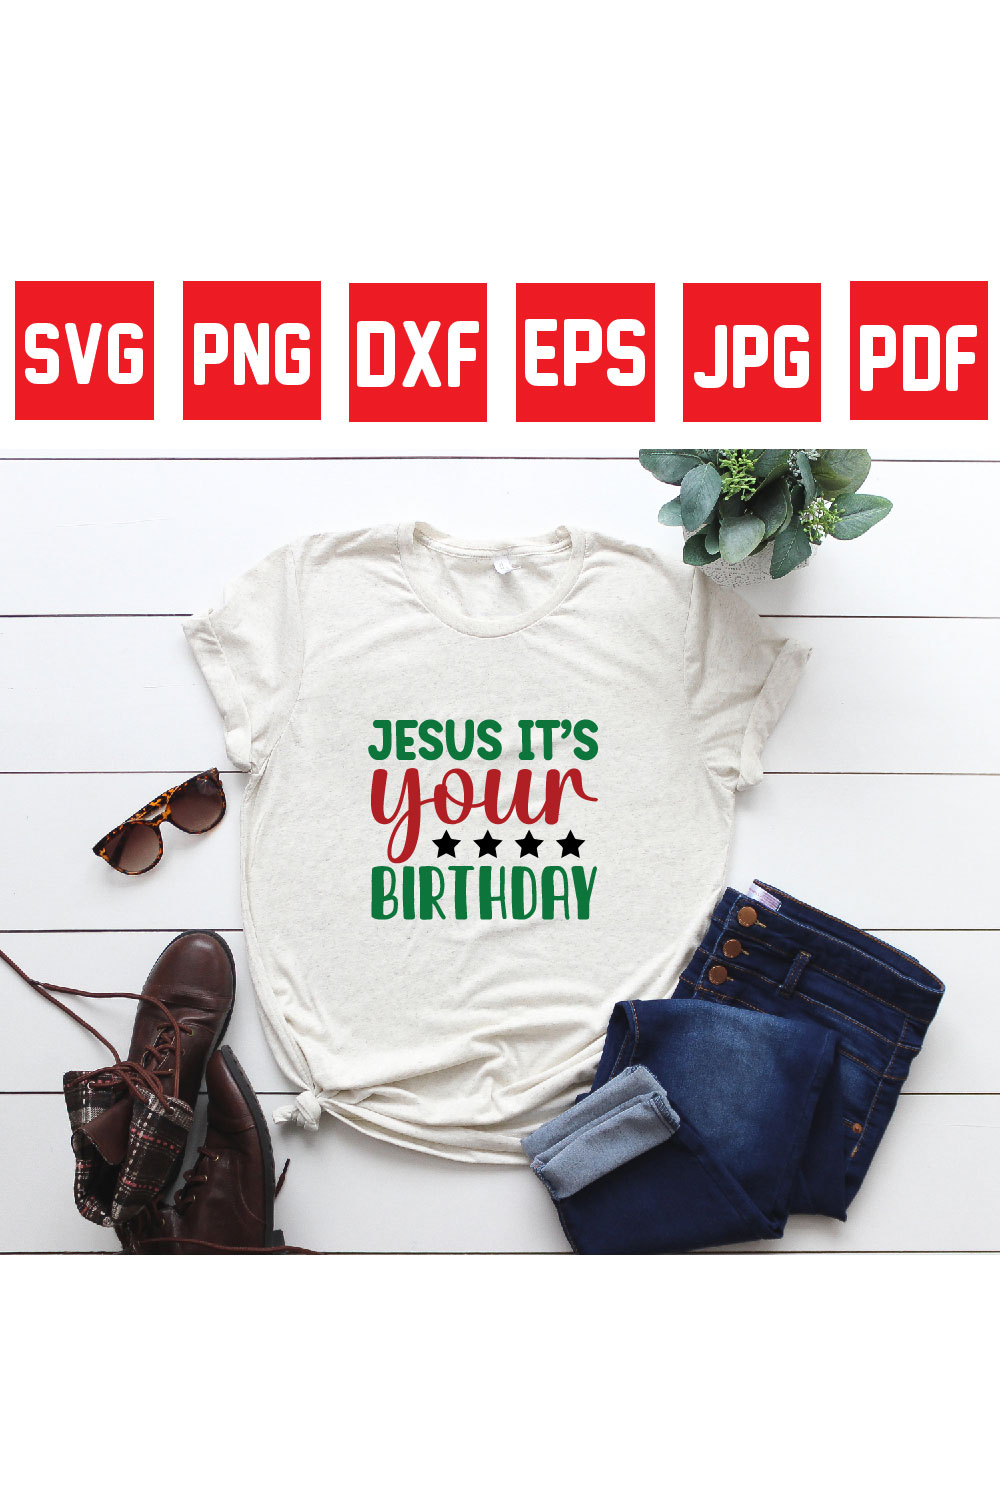 jesus it’s your birthday pinterest preview image.